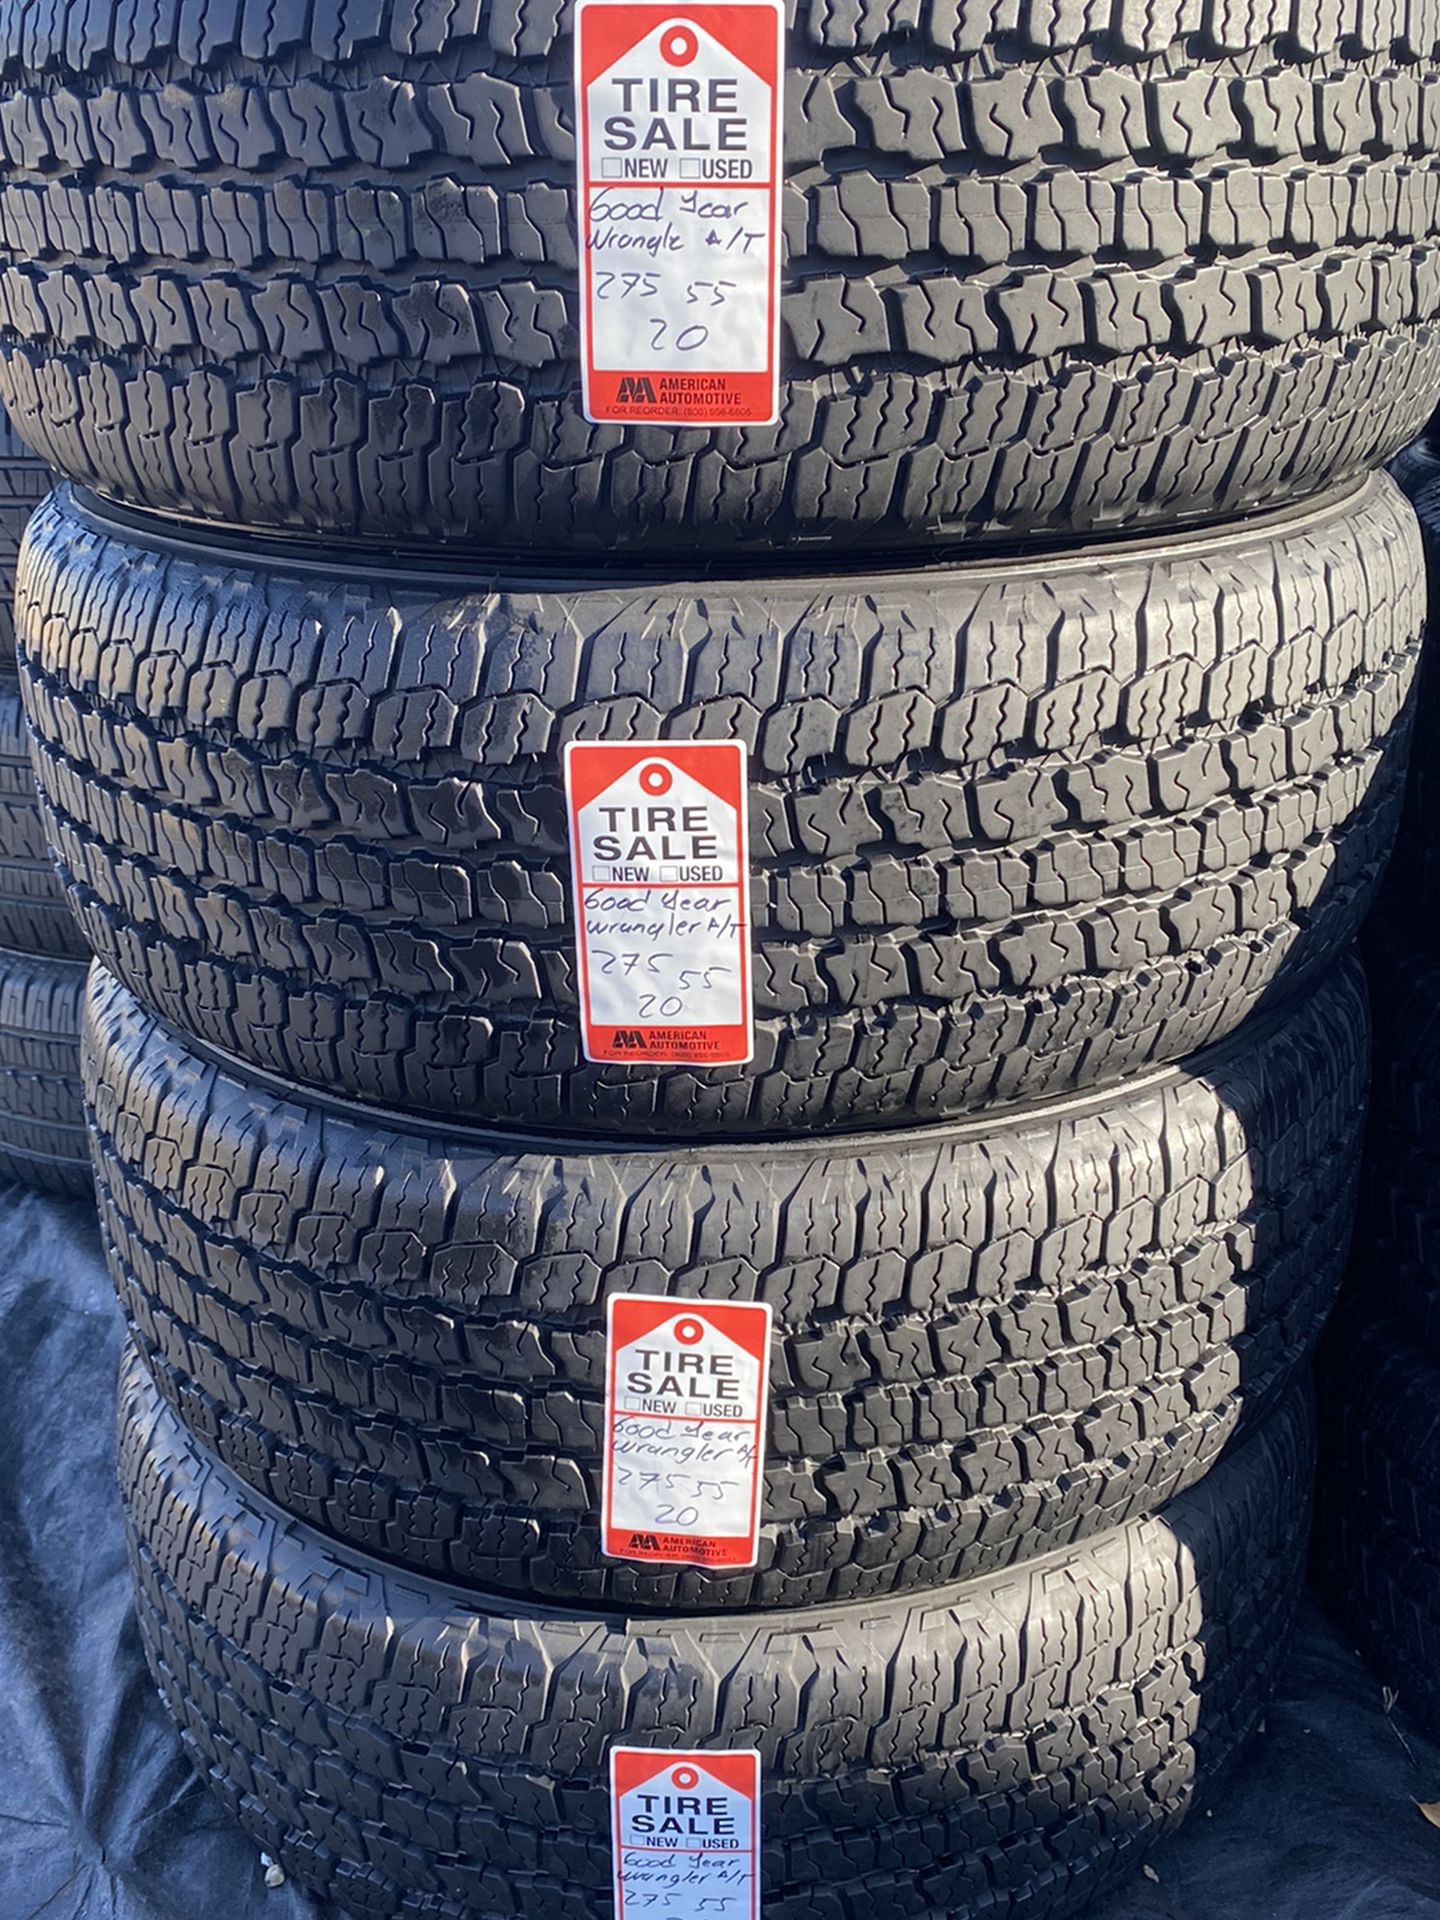 4 used Tires 275/55/20 Goodyear Wrangler A/T For $280 for Sale in Sugar  Land, TX - OfferUp